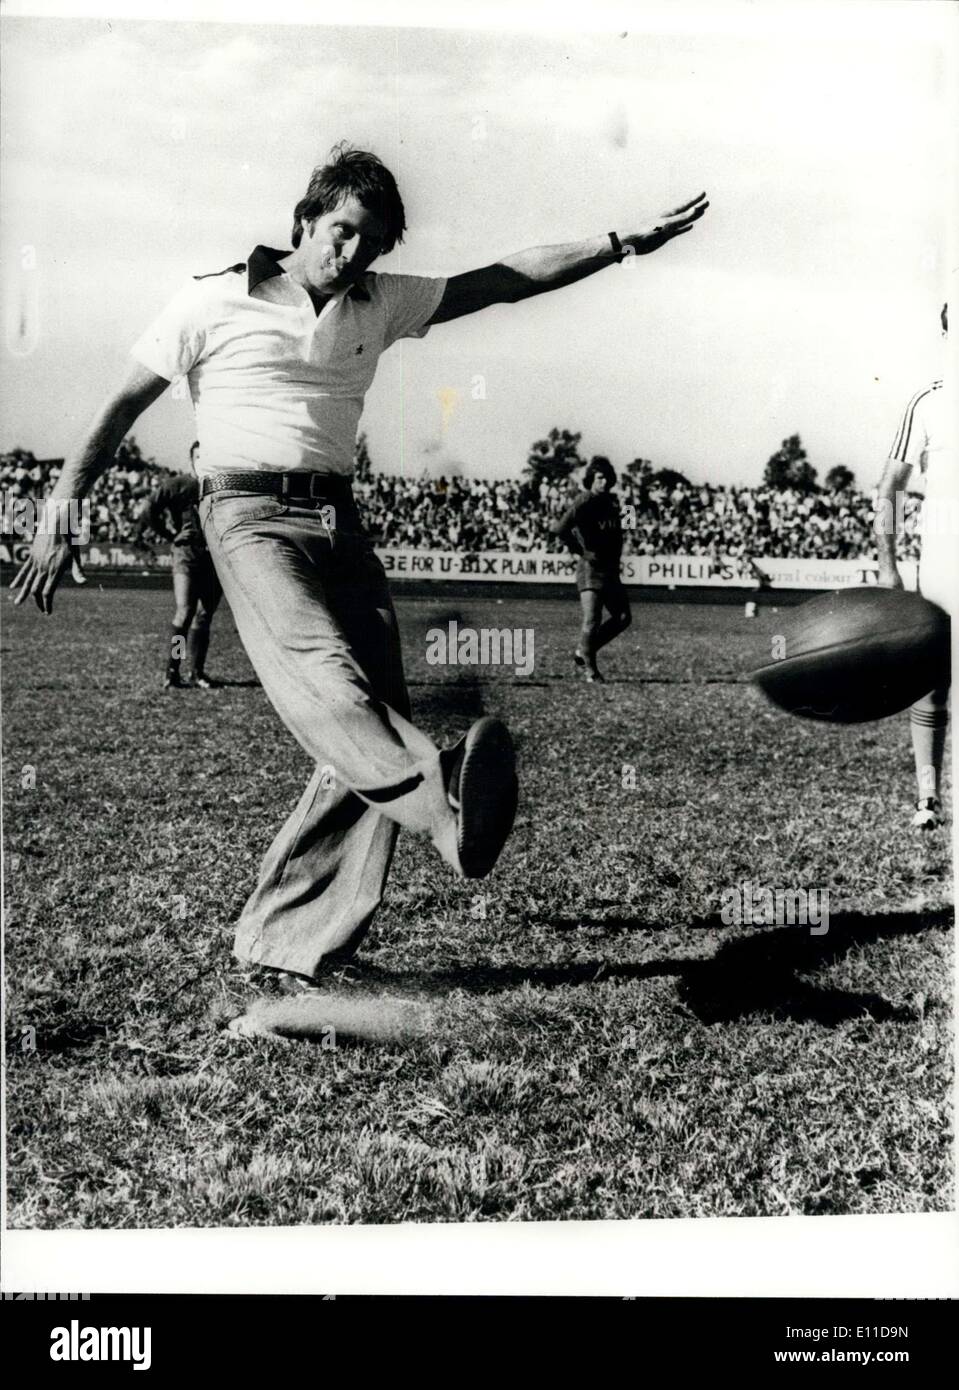 Apr. 19, 1977 - Jeff Thompson is fit to tour England this summer: Jeff Thompson, the Australian fast bowler who injured a shoulder during a test match against Pakistan past a fitness test, and will now be in the team to tour England this summer. Photo shows Jeff Thompson kicks off for a Rugby league match in Melbourne. Stock Photo